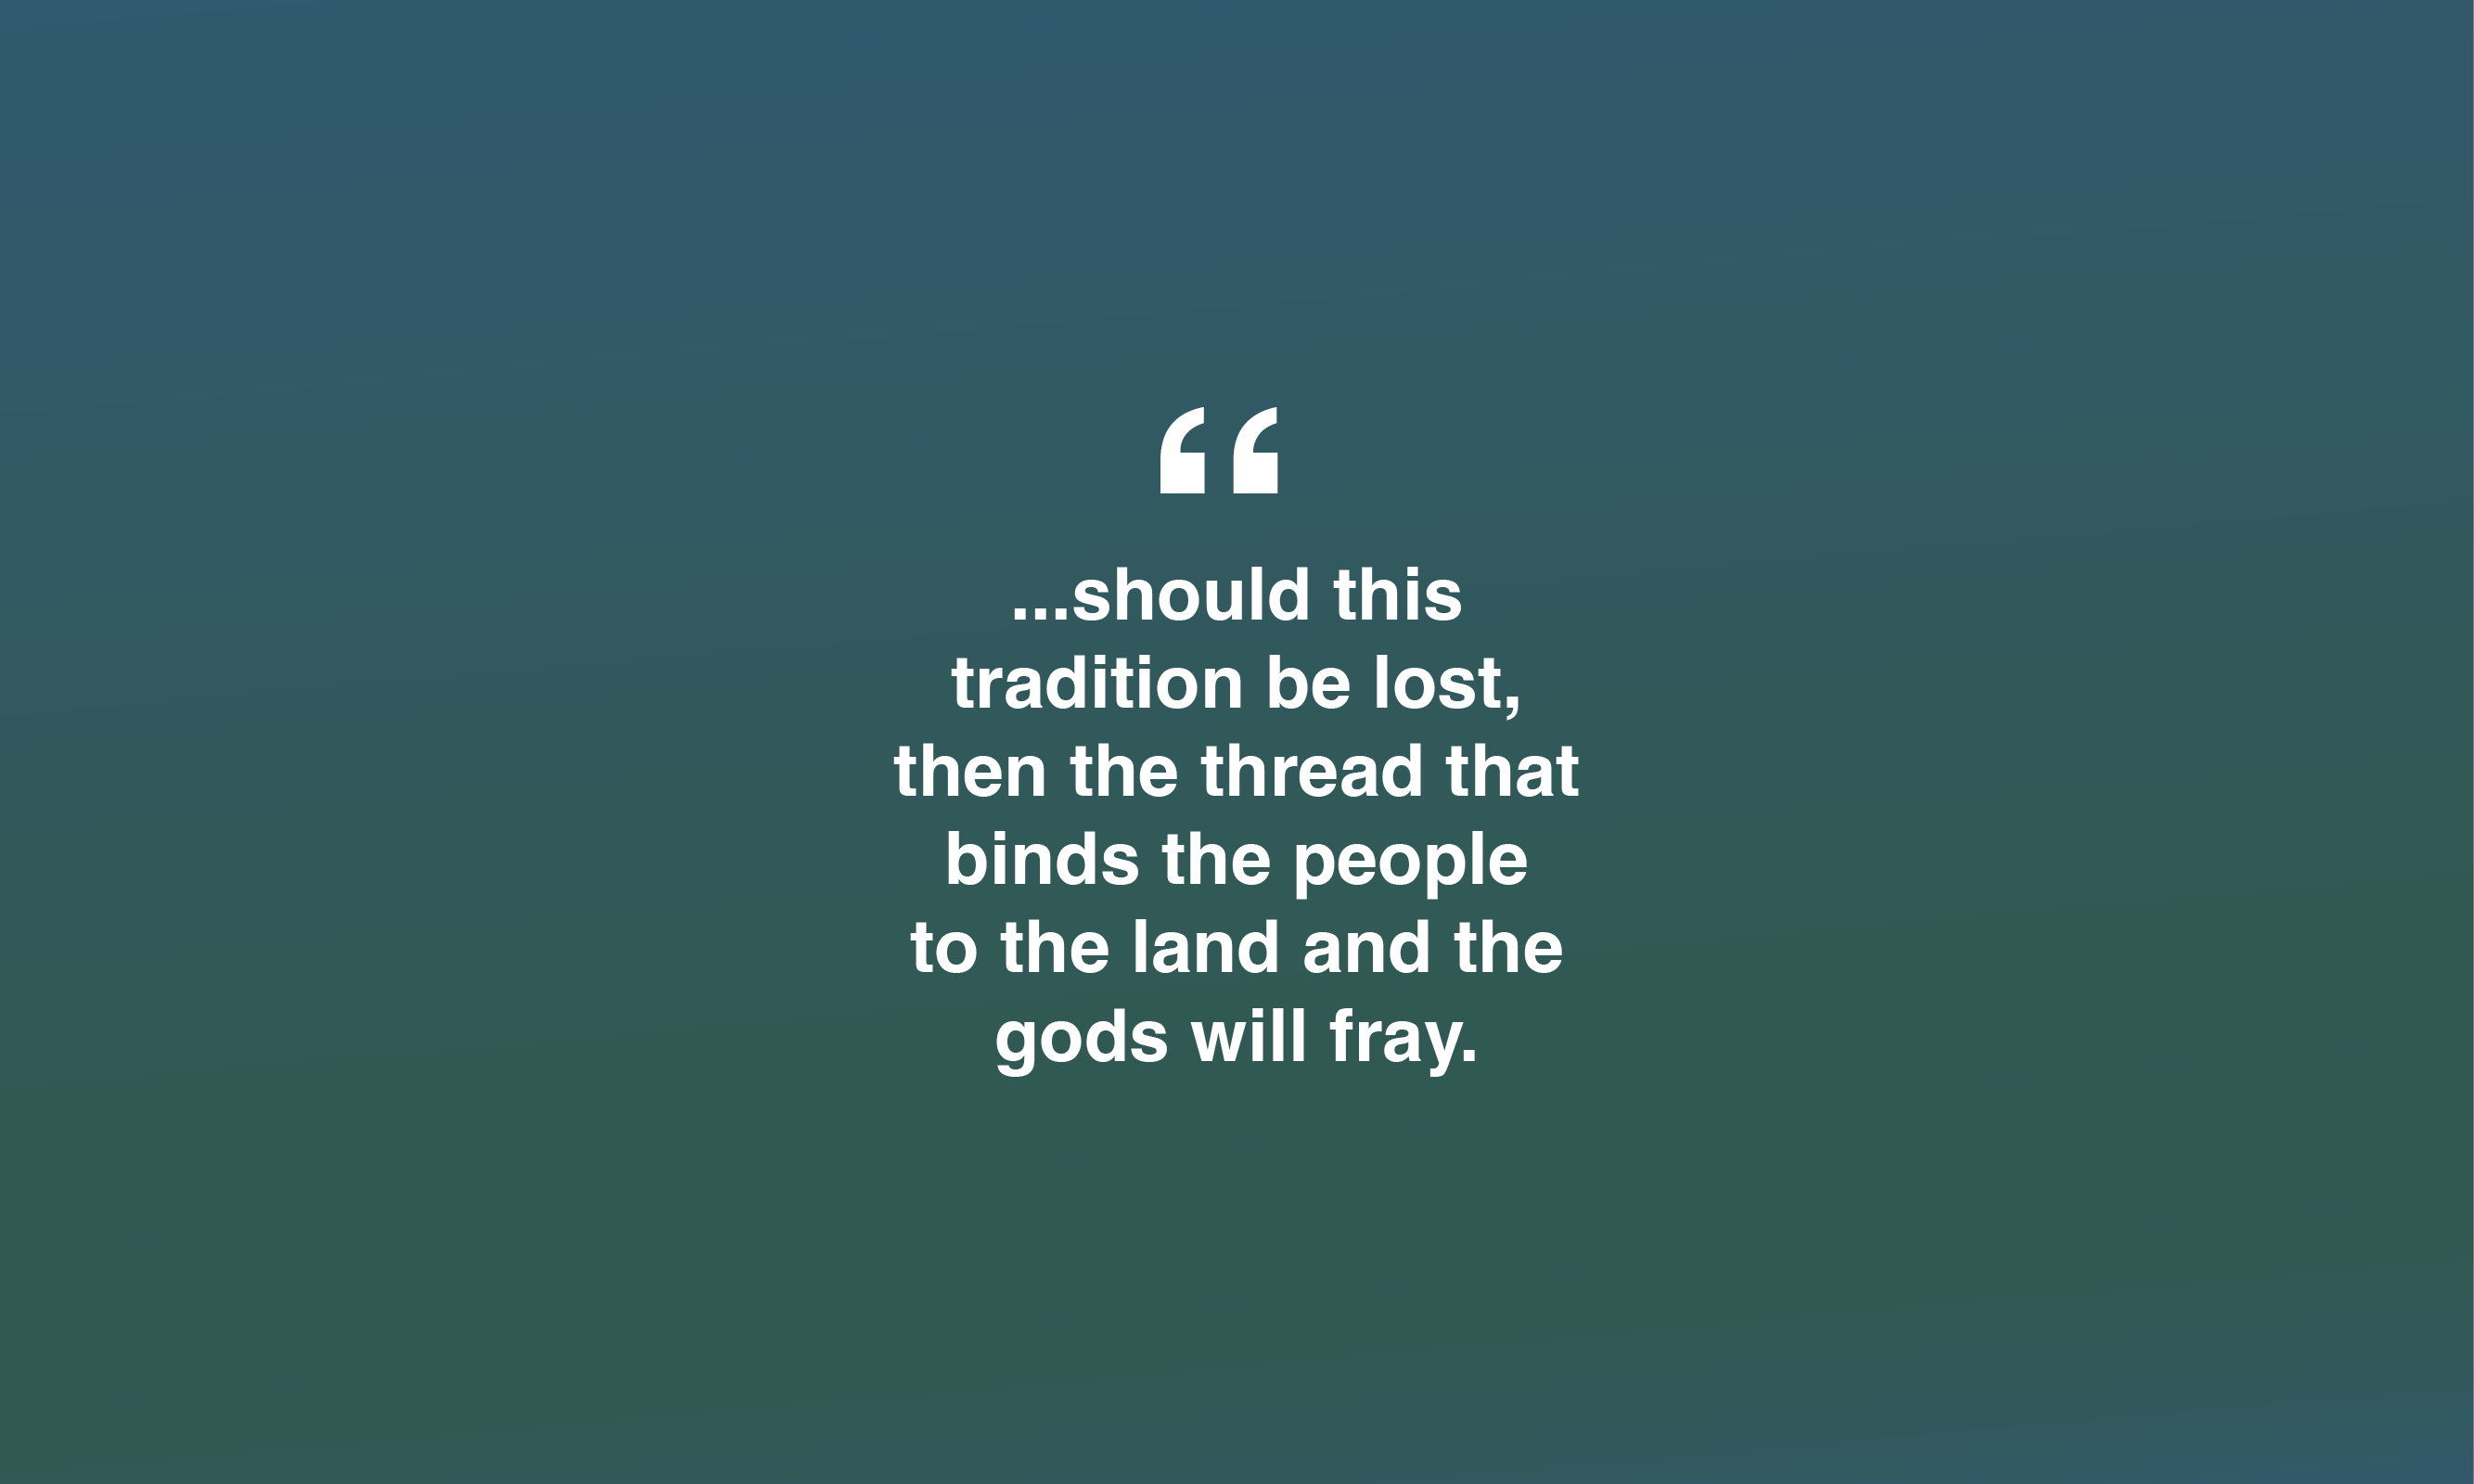 should this tradition be lost, then the thread that binds the people to the land and gods will fray